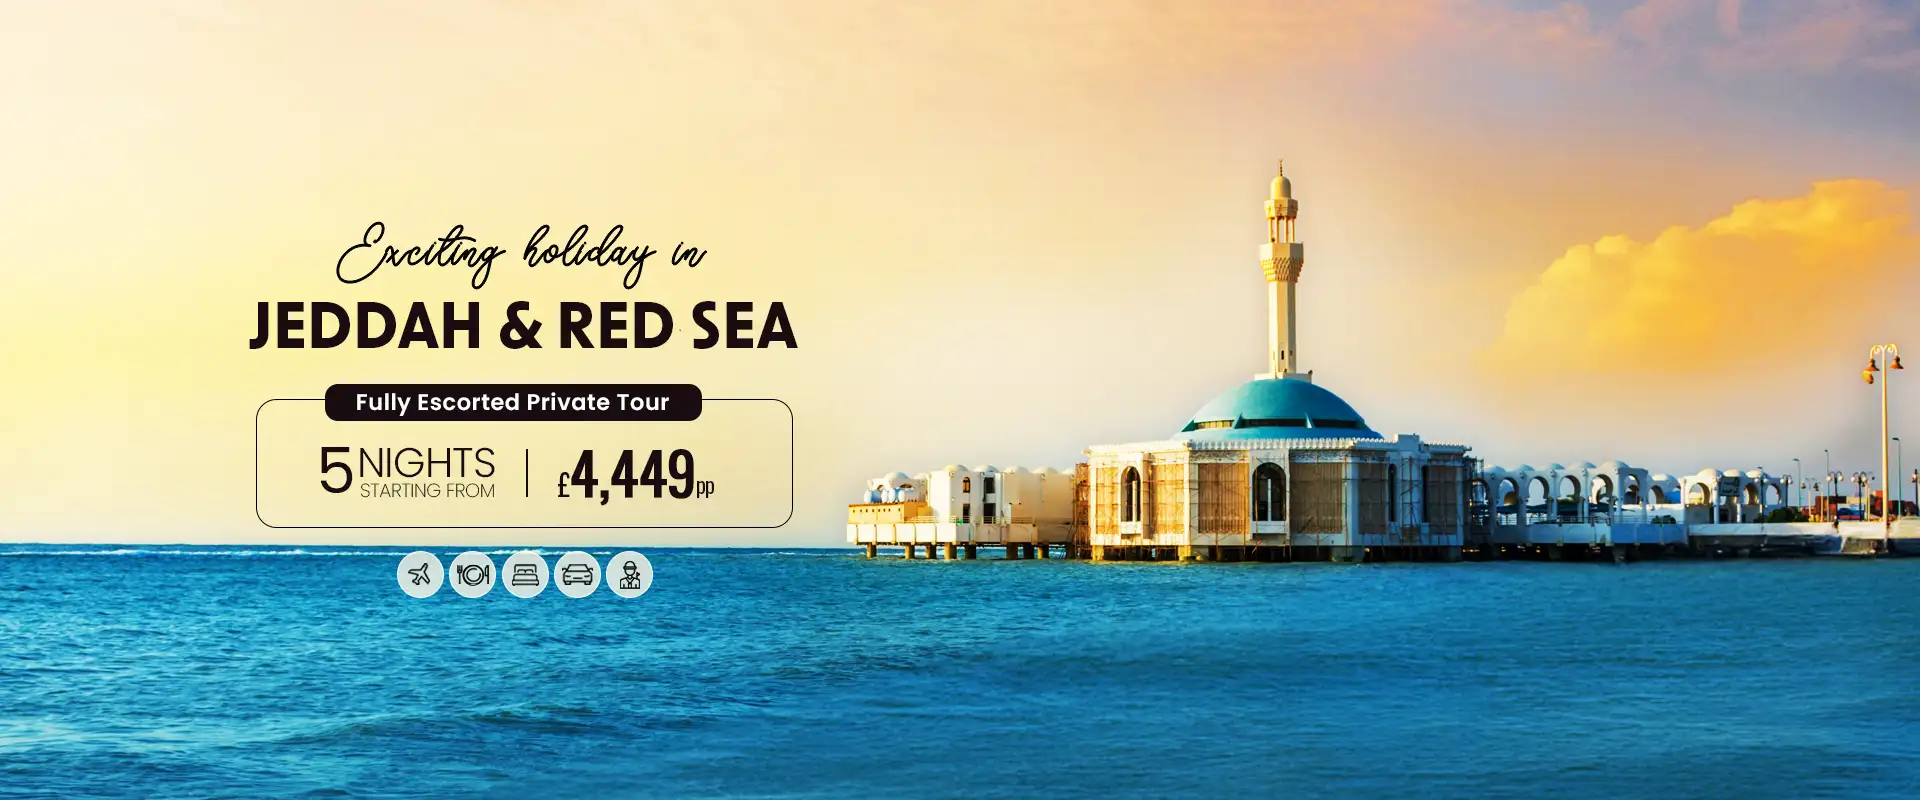 Exciting Holiday in Jeddah & Red Sea